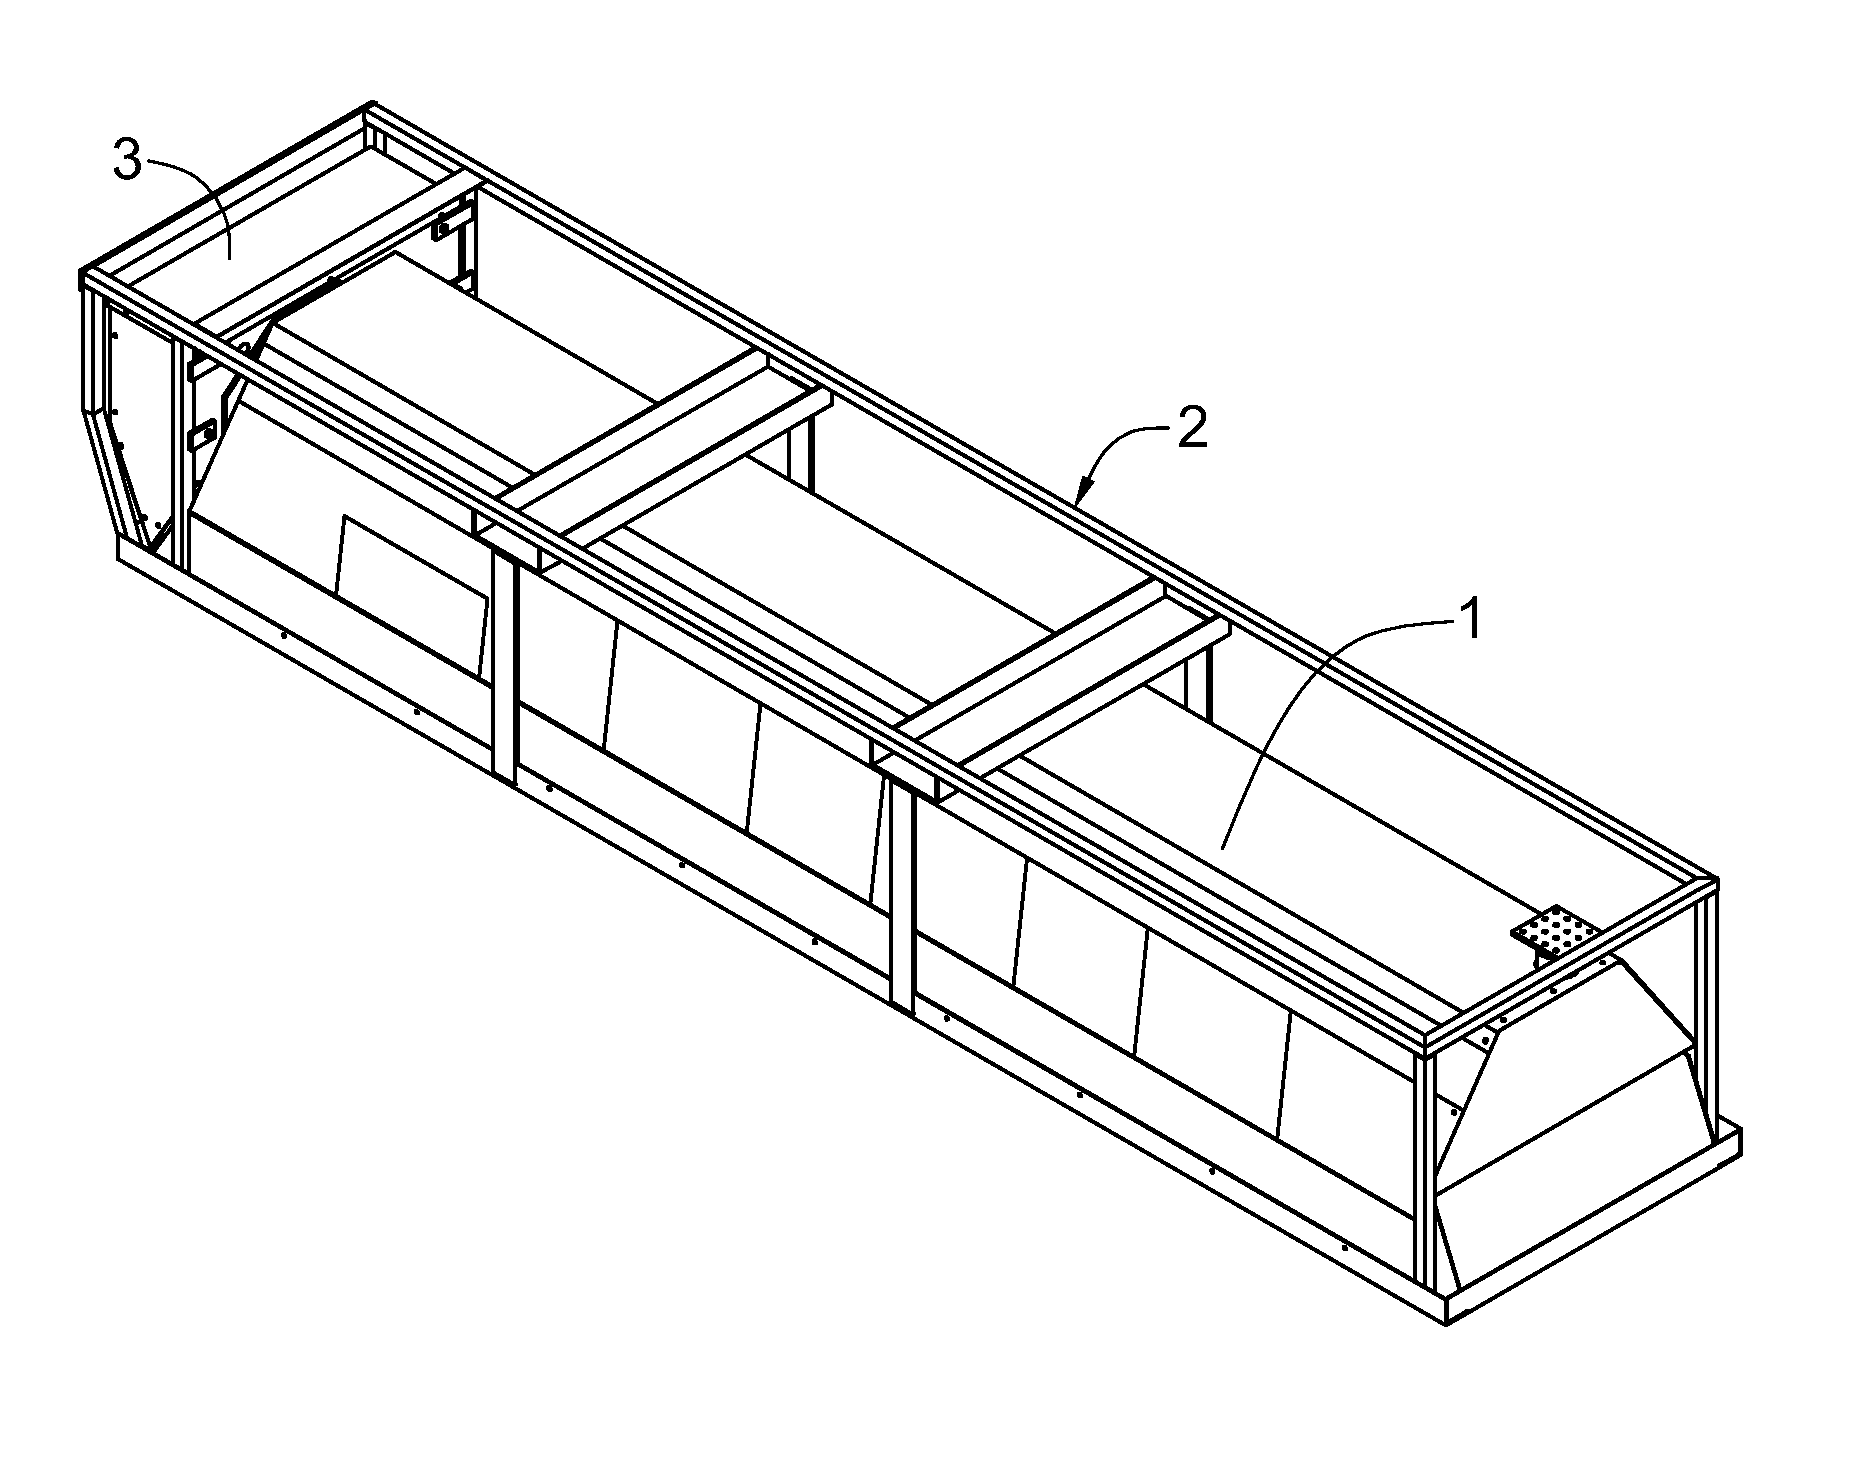 Apparatus and method for heating ground